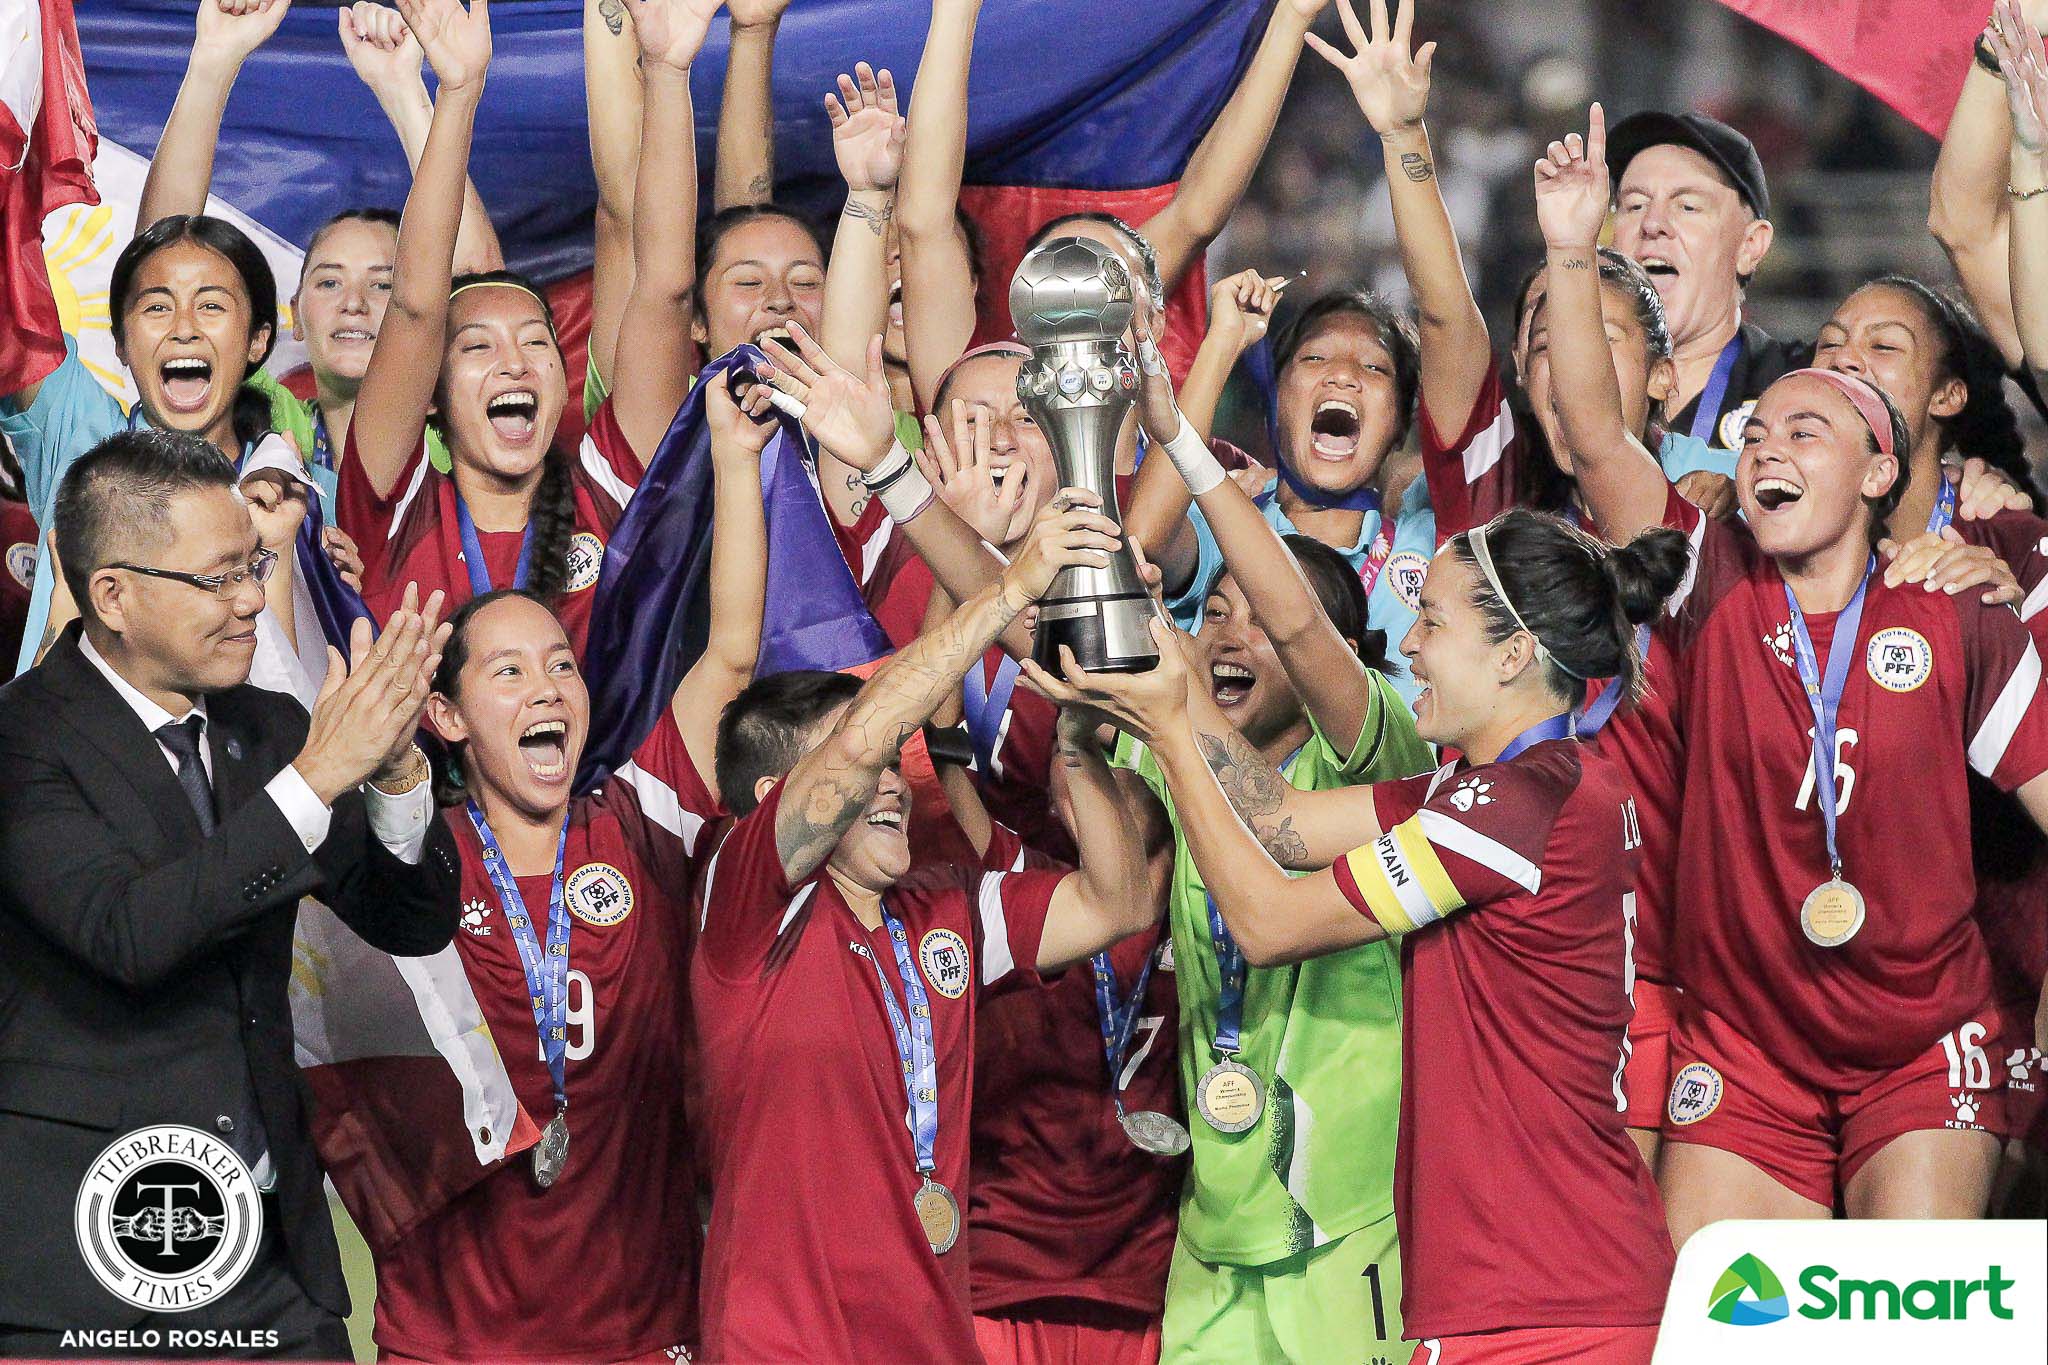 2022-AFF-Womens-Championship-Philippines-vs-Thailand-Finals-Celeb-PHI-Trophy-2 Stajcic looks ahead to make Filipinas world beaters 2022 AFF Women’s Championship Filipinas Football News  - philippine sports news